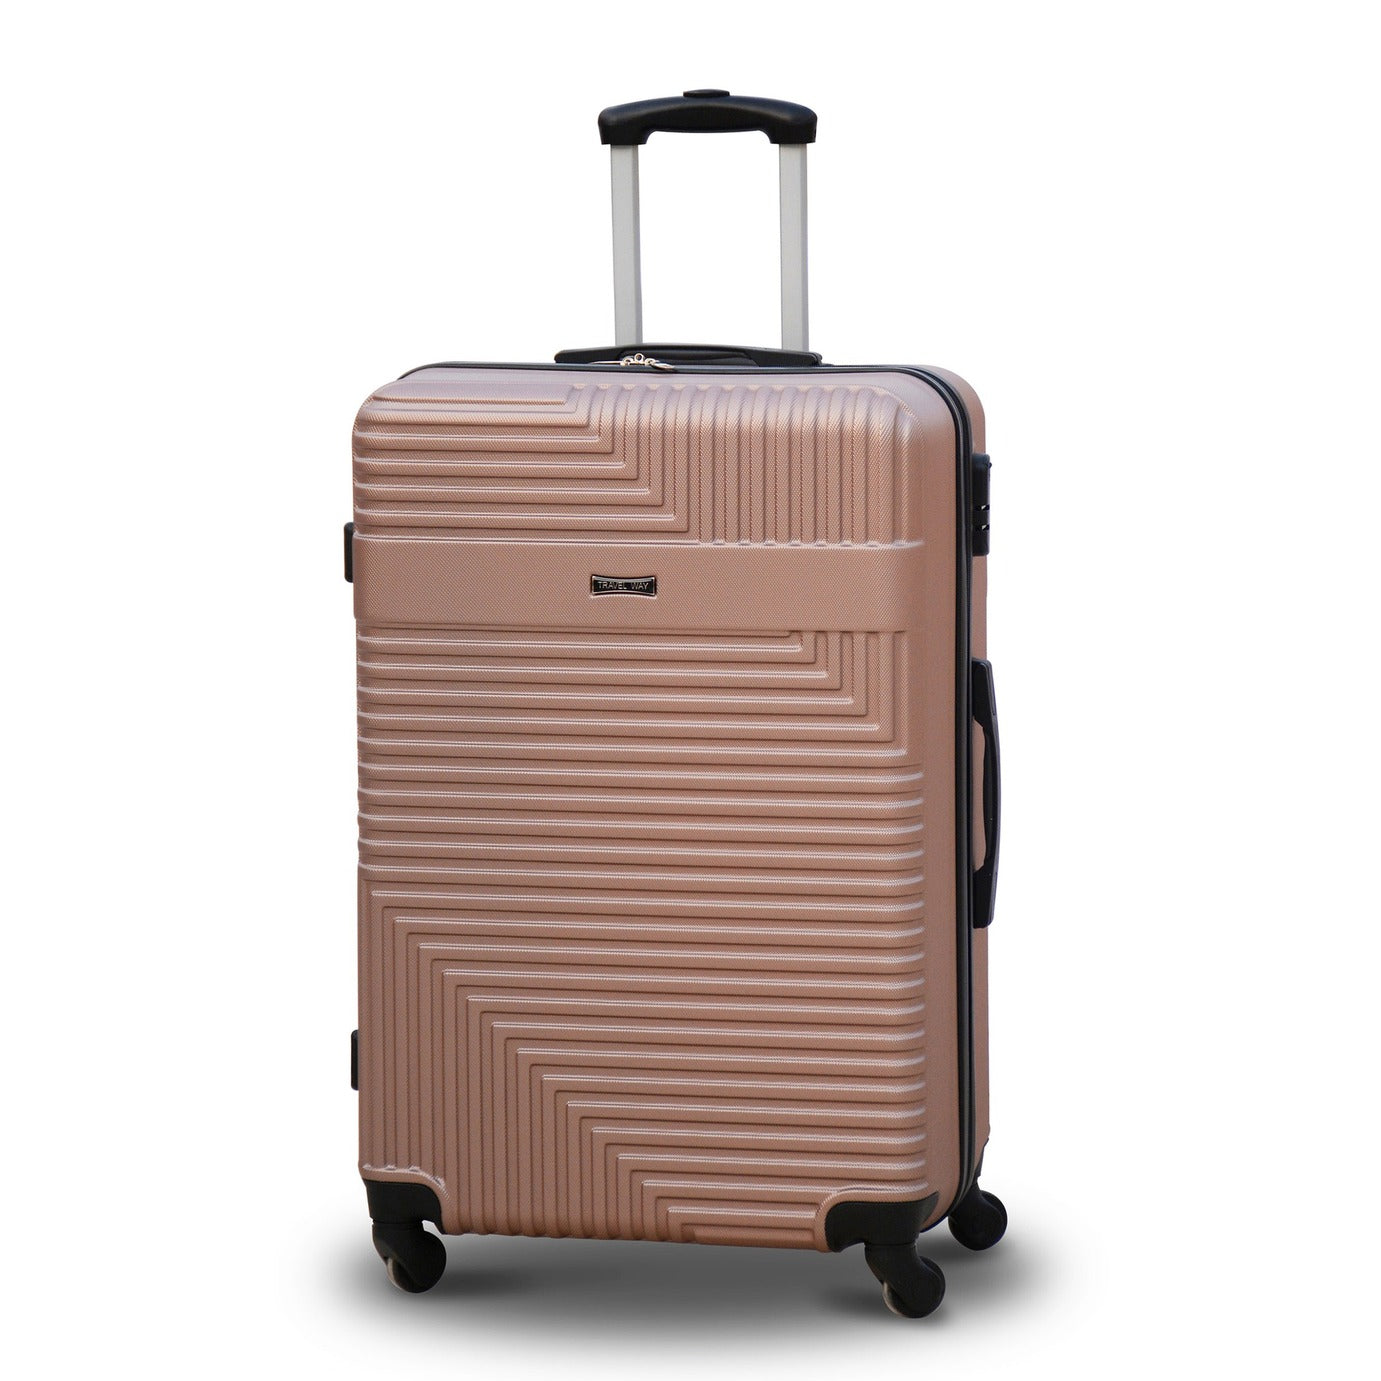 32" Rose Gold Colour Travel Way ABS Luggage Lightweight Hard Case Trolley Bag with Spinner Wheel